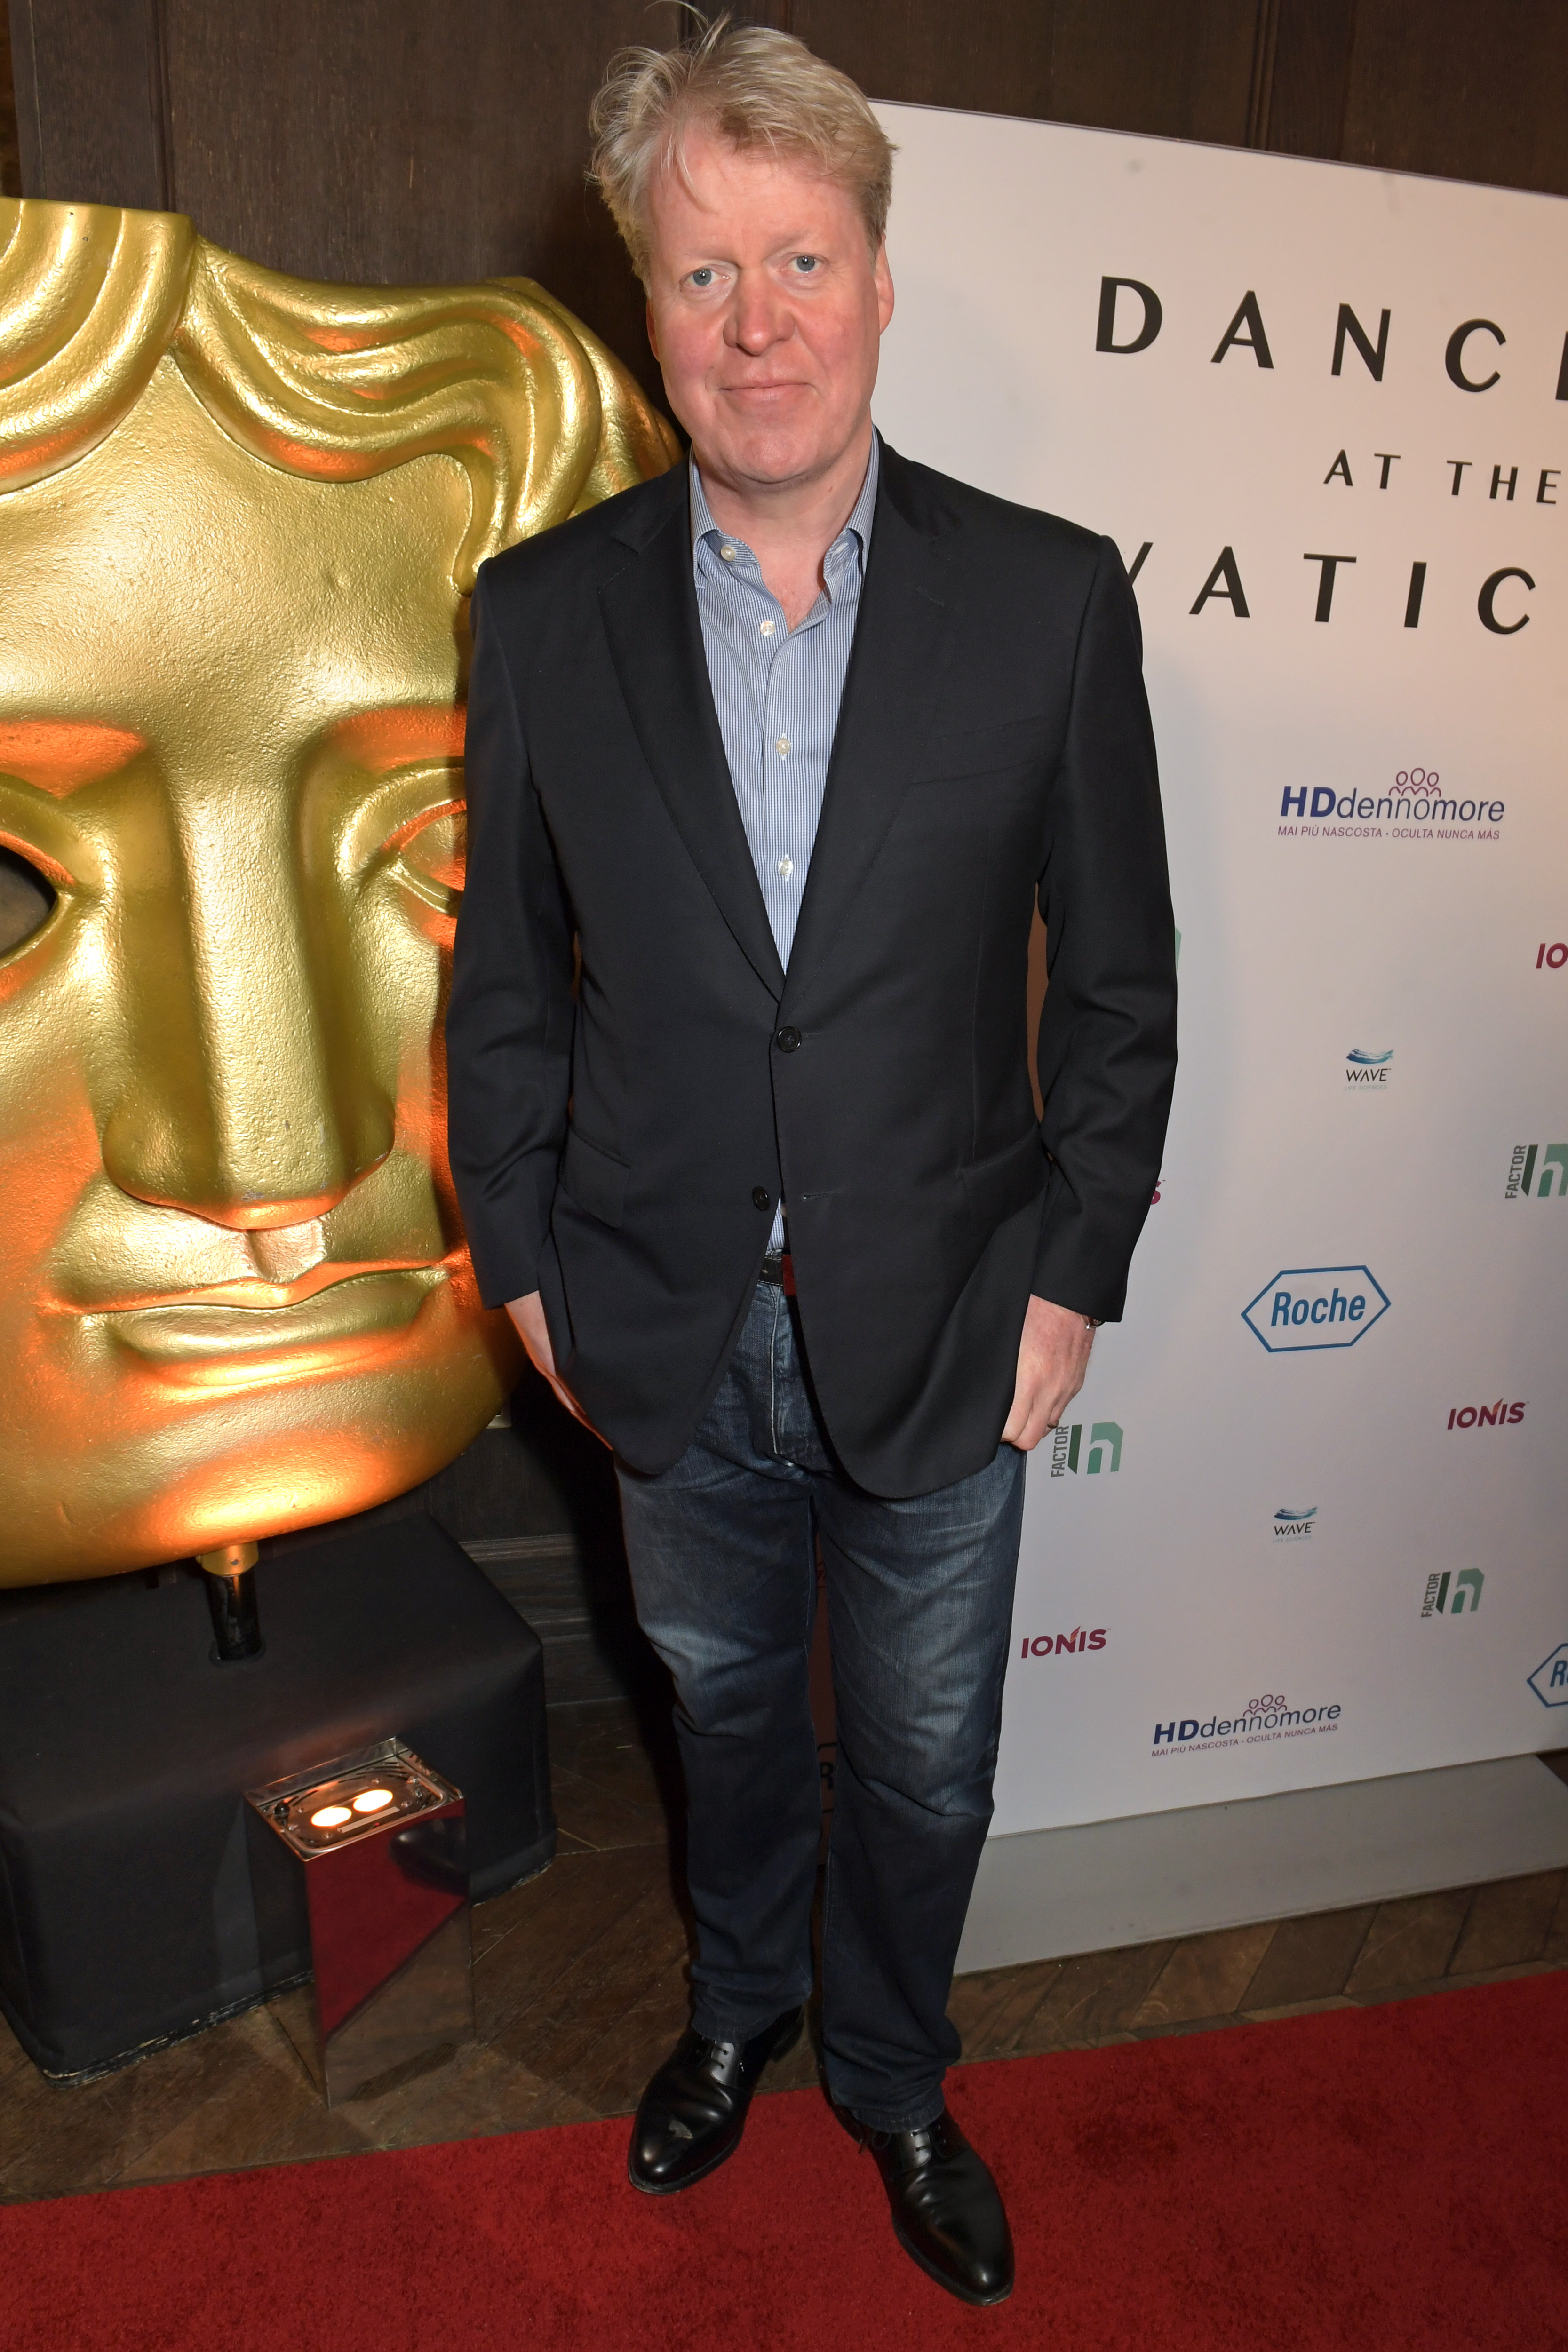 Charles Spencer at the premiere of "Dancing at the Vatican" in London, England on February 5, 2020 | Source: Getty Images